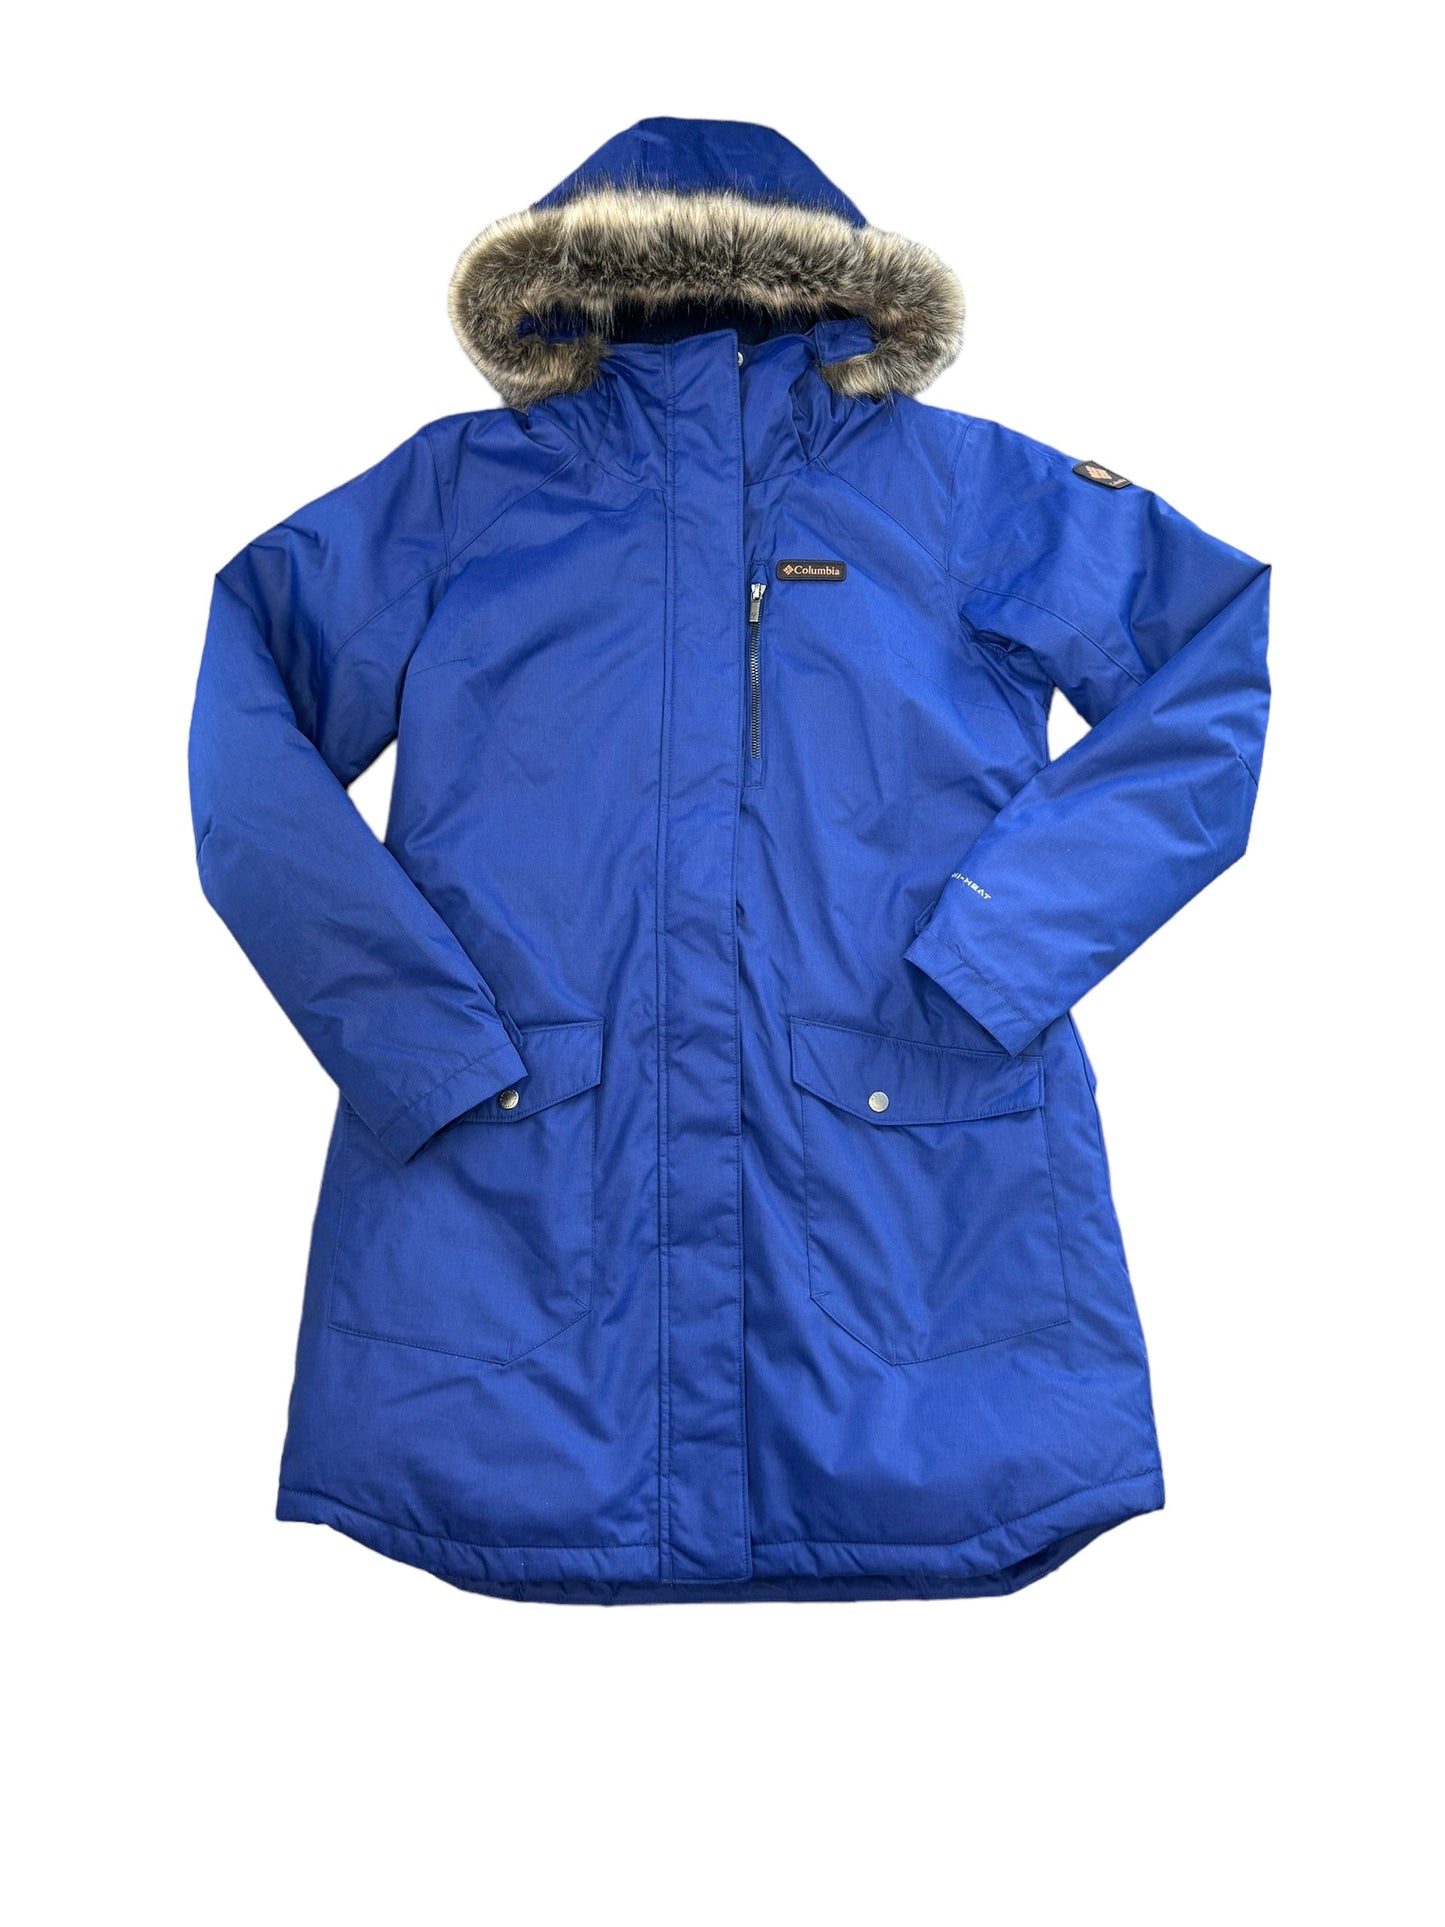 Coat Parka By Columbia  Size: L